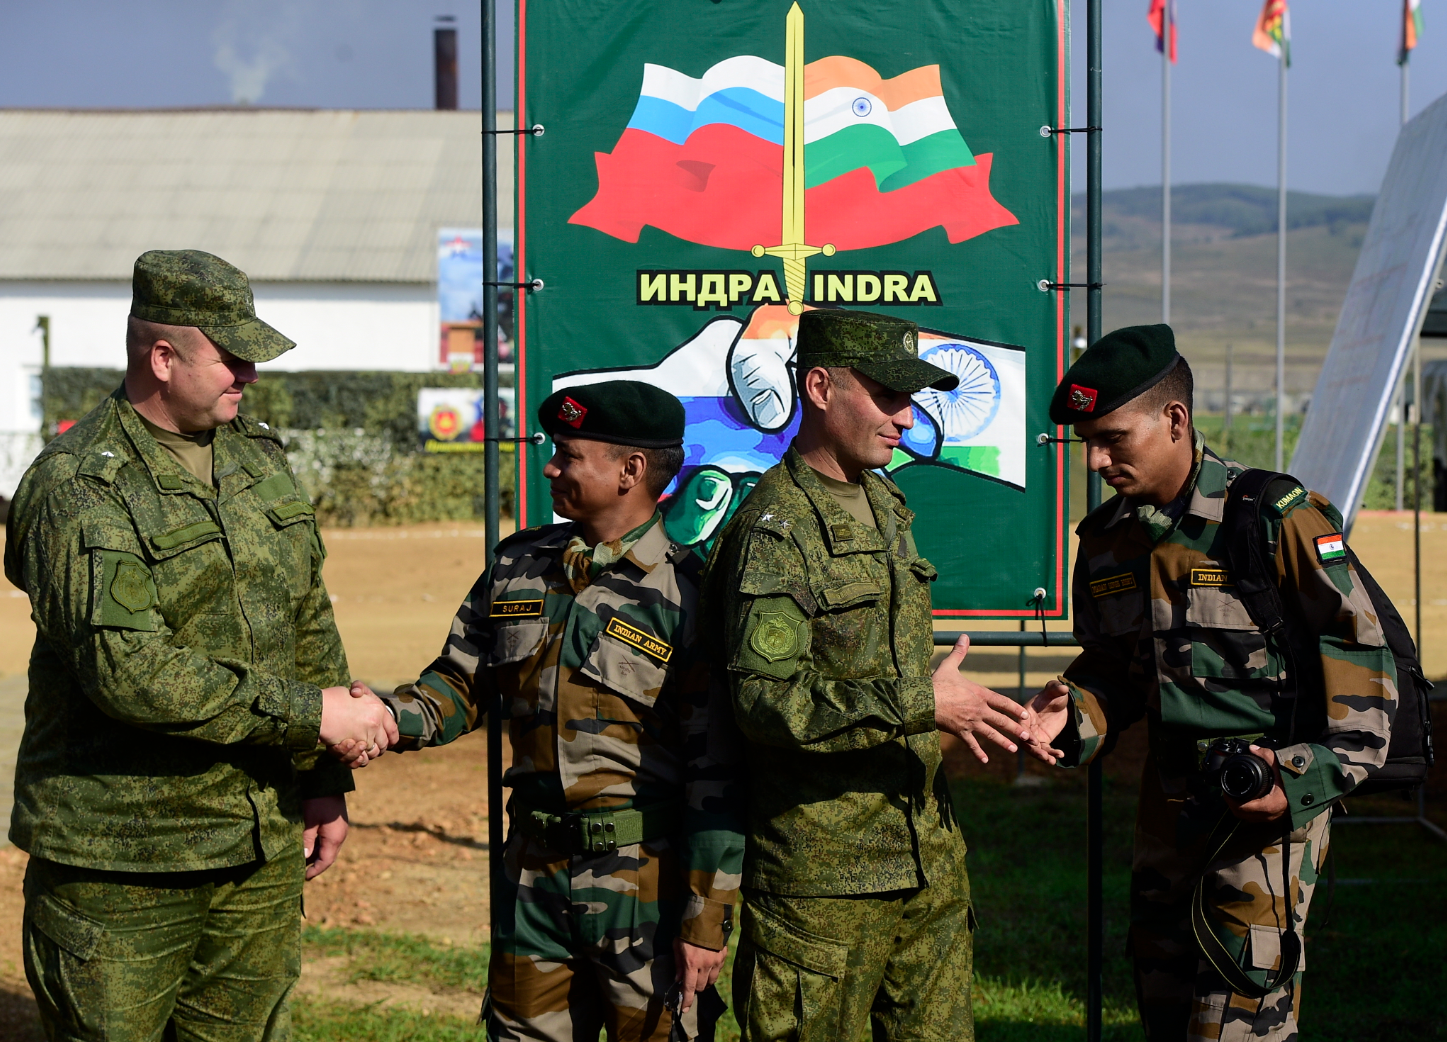 If Russia throws its military helmet into the ring, India would welcome such direct support.